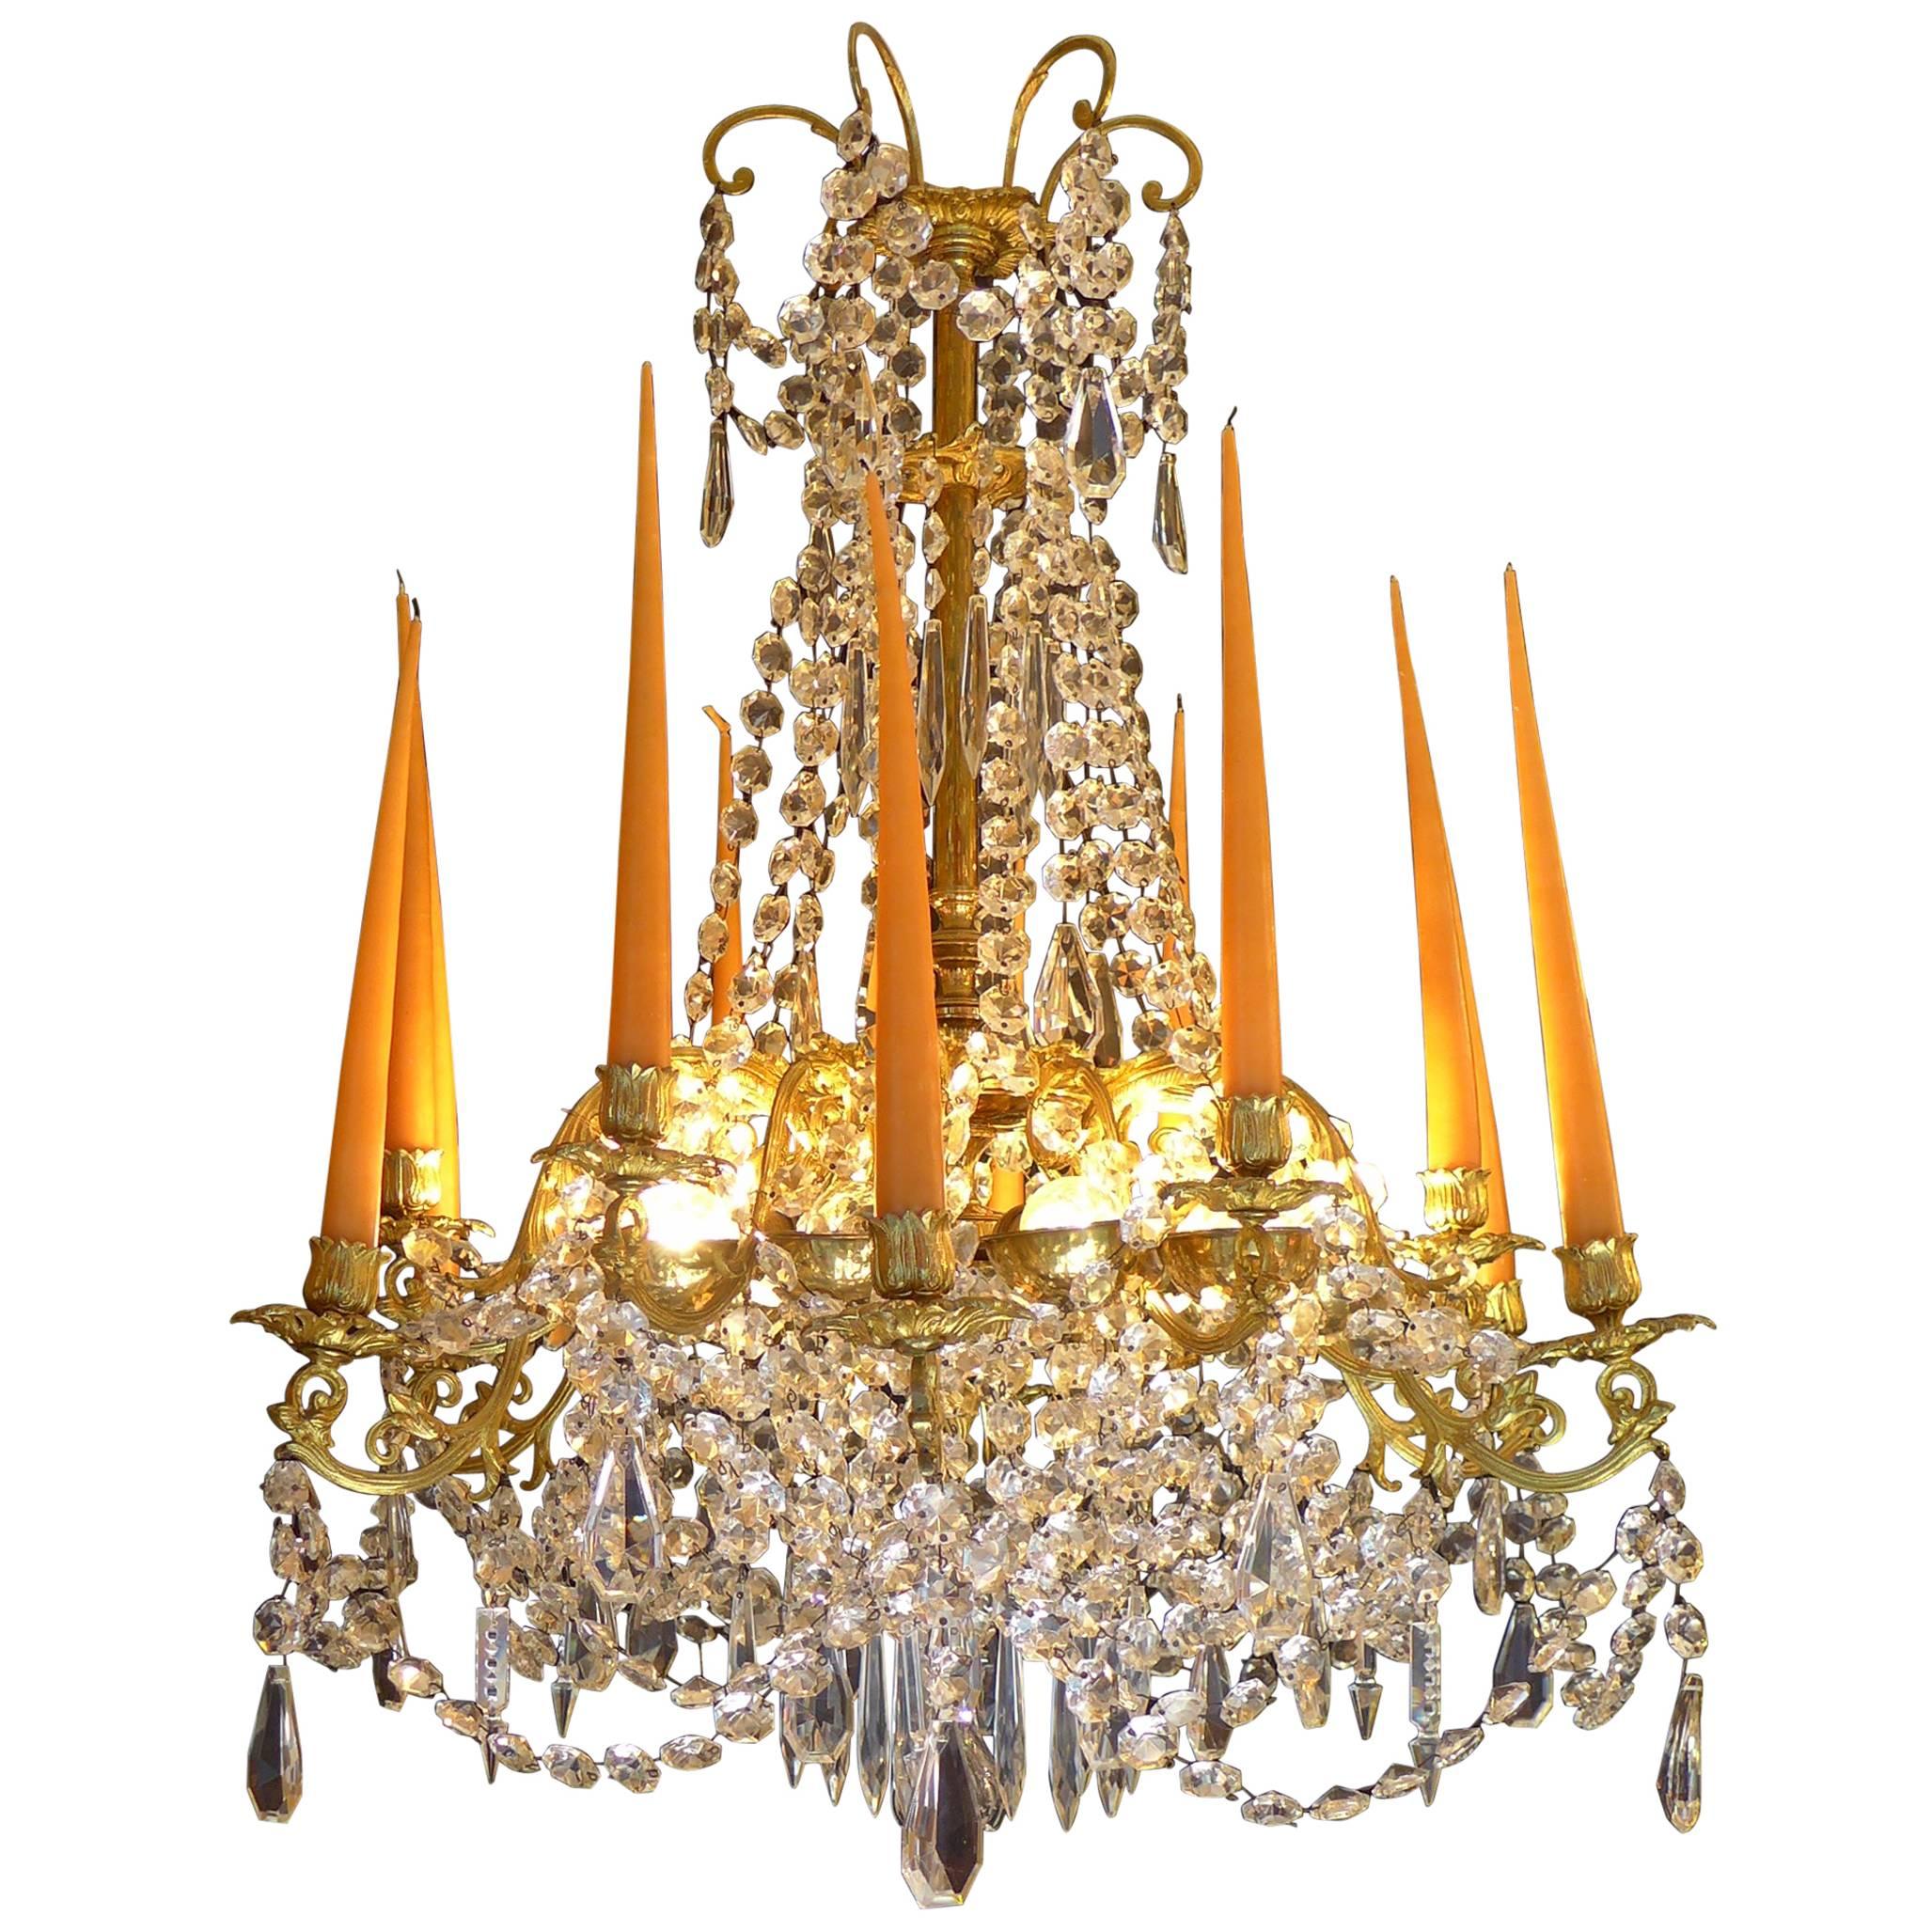 French Louis XVI Style Gilt Bronze and Crystal Chandelier Attributed to Baguès